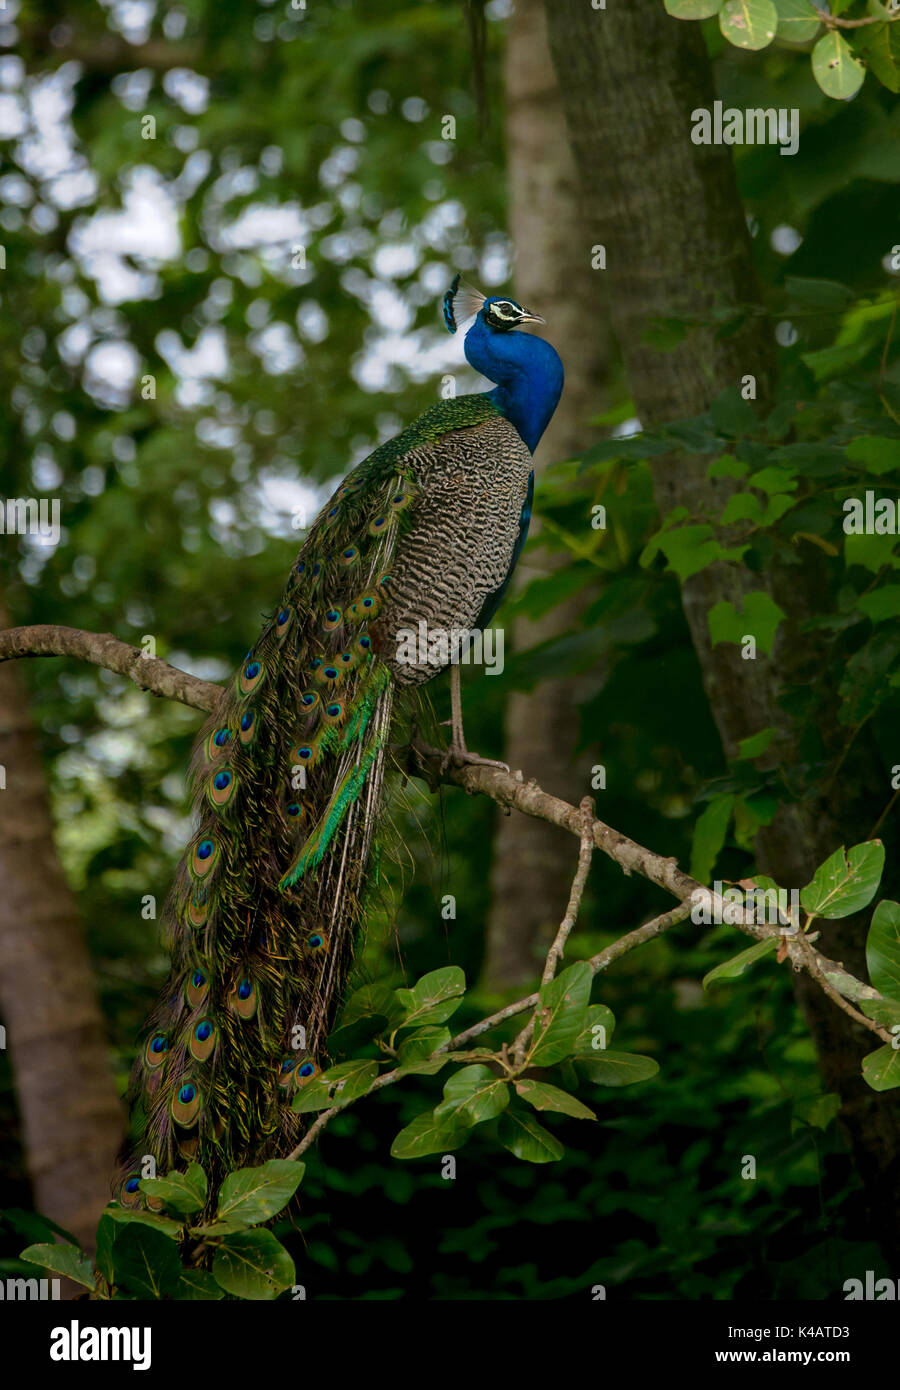 An Indian Peacock Bird perched on a tree branch showing off its long train Stock Photo